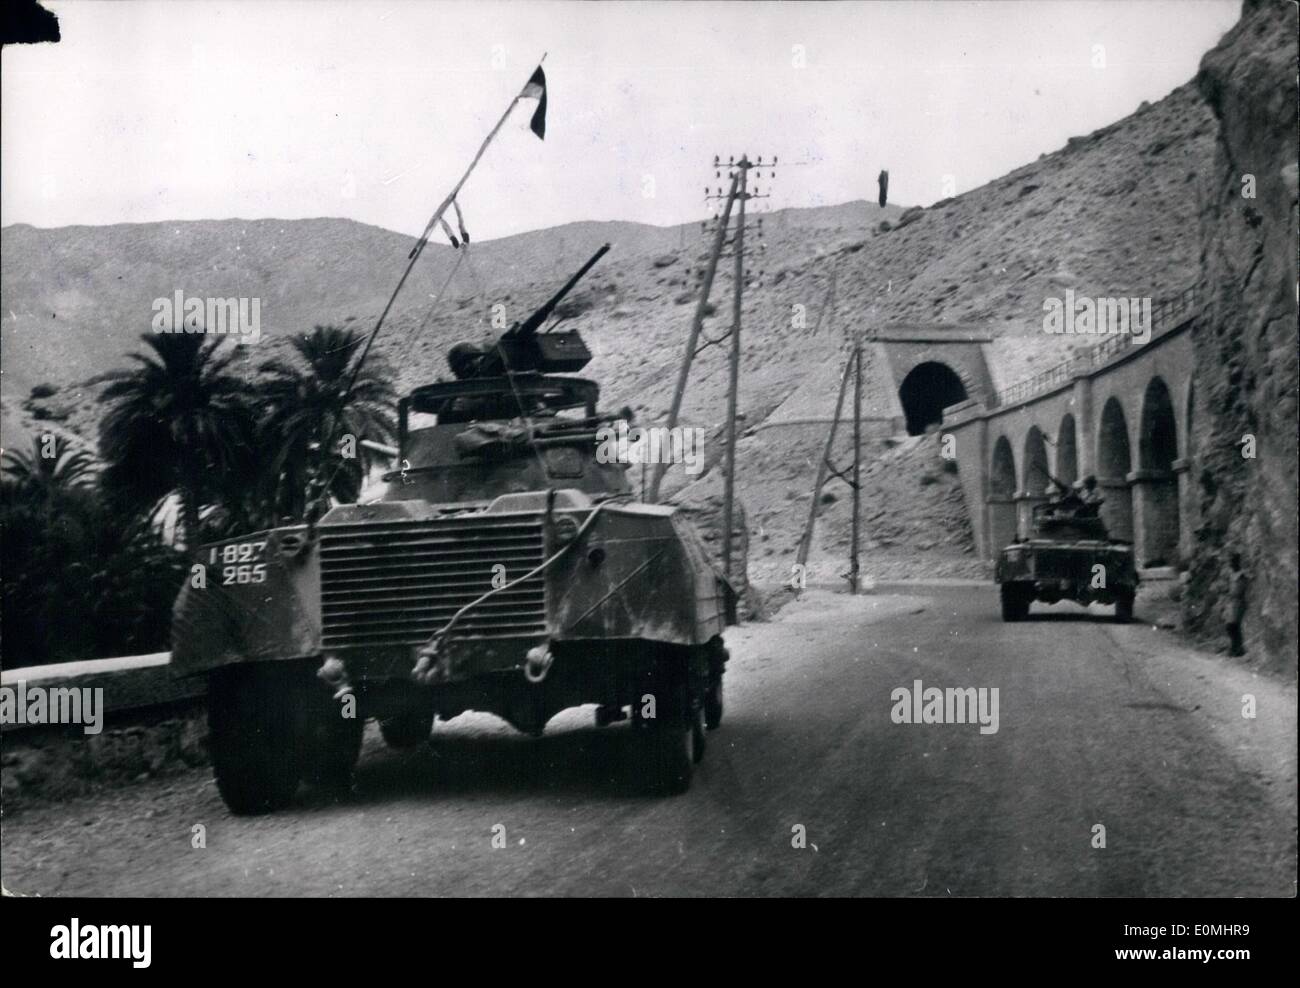 Aug. 08, 1955 - French troops patrol trouble zones in Algeria: French armoured cabs patrolling in the mountain area of El Kantara, near Siskre where rebels were reported recently. Stock Photo